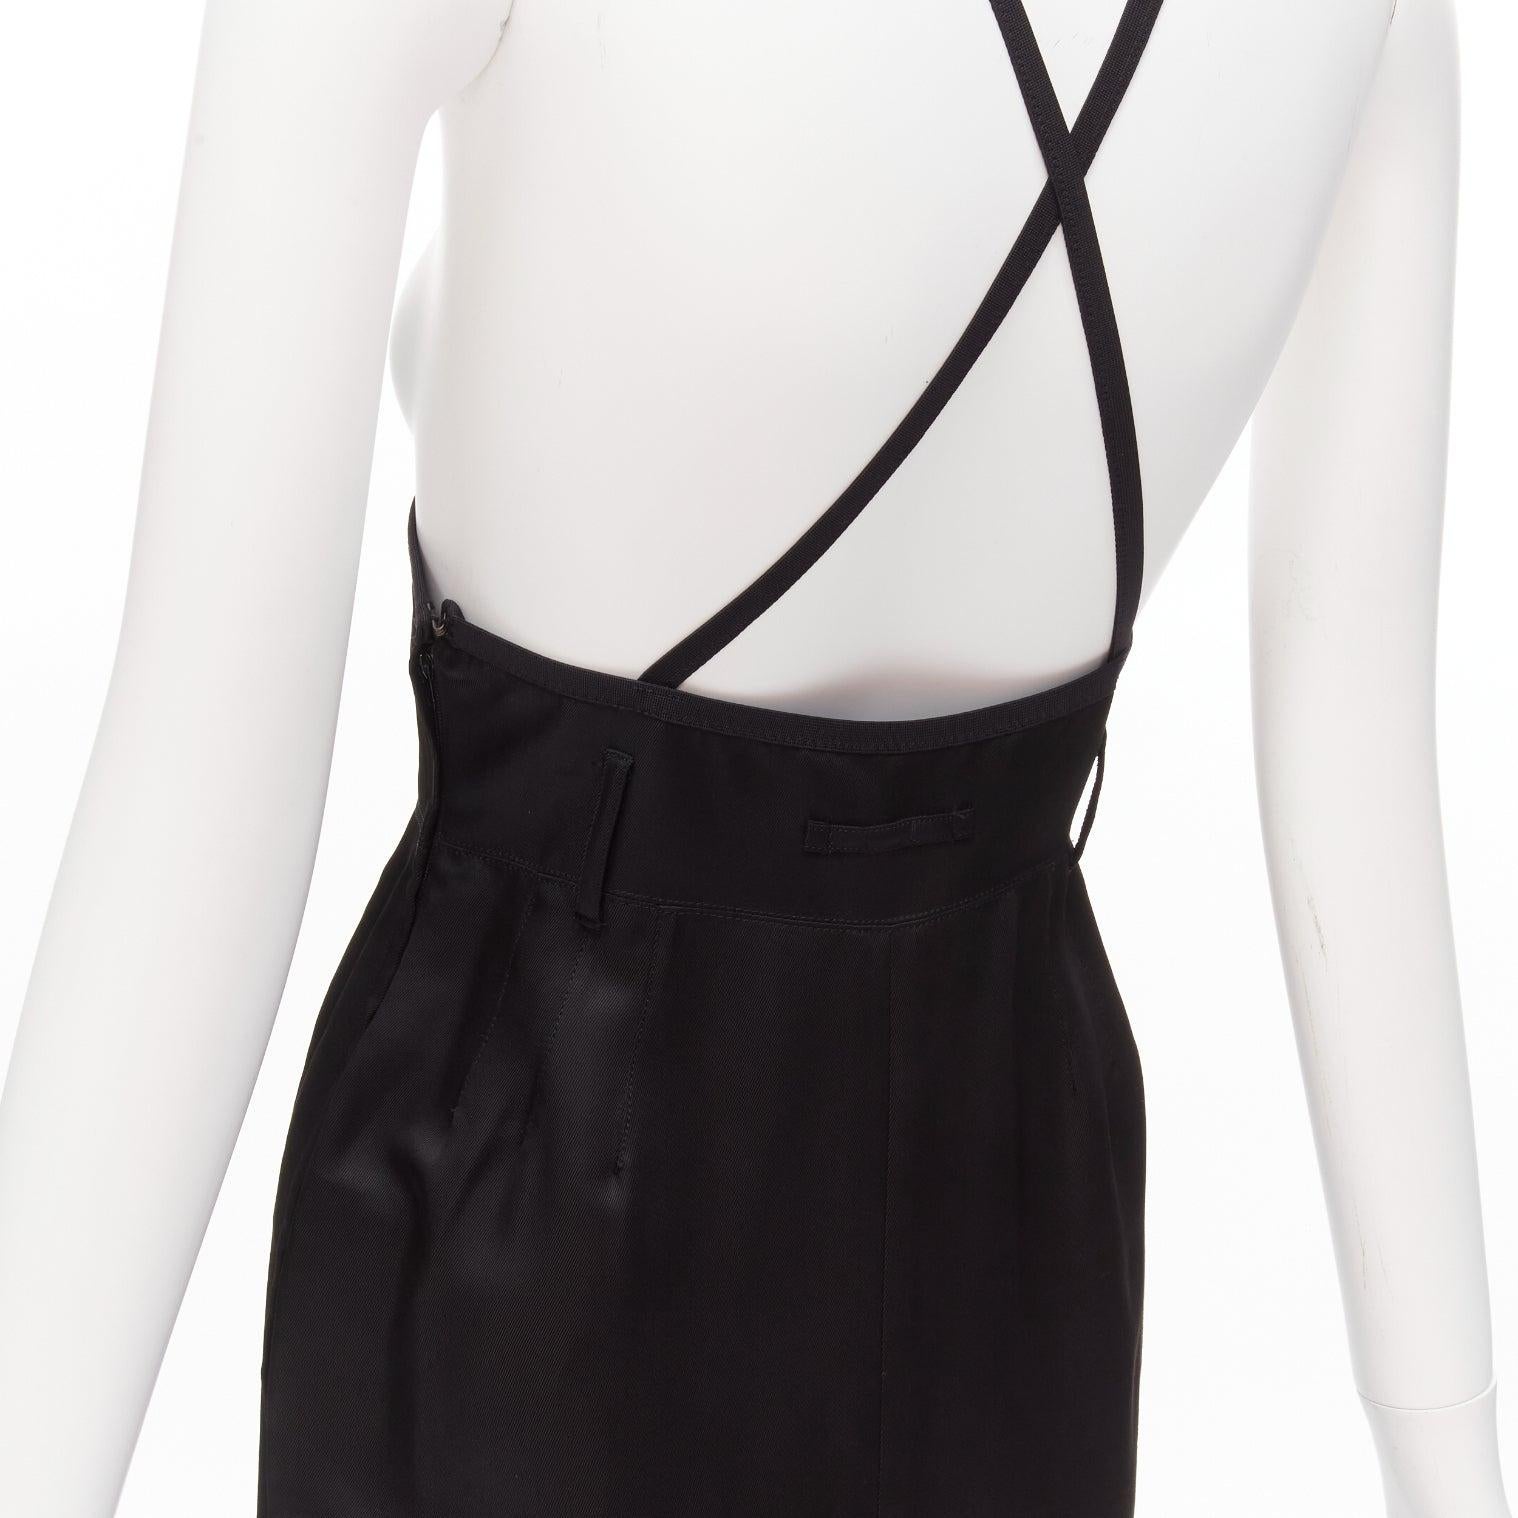 JEAN PAUL GAULTIER FEMME Vintage black silk twill cross strap dungaree dress FR40 L
Reference: TGAS/D00567
Brand: Jean Paul Gaultier
Designer: Jean Paul Gaultier
Collection: FEMME
Material: Rayon, Blend
Color: Black
Pattern: Solid
Closure: Zip
Extra